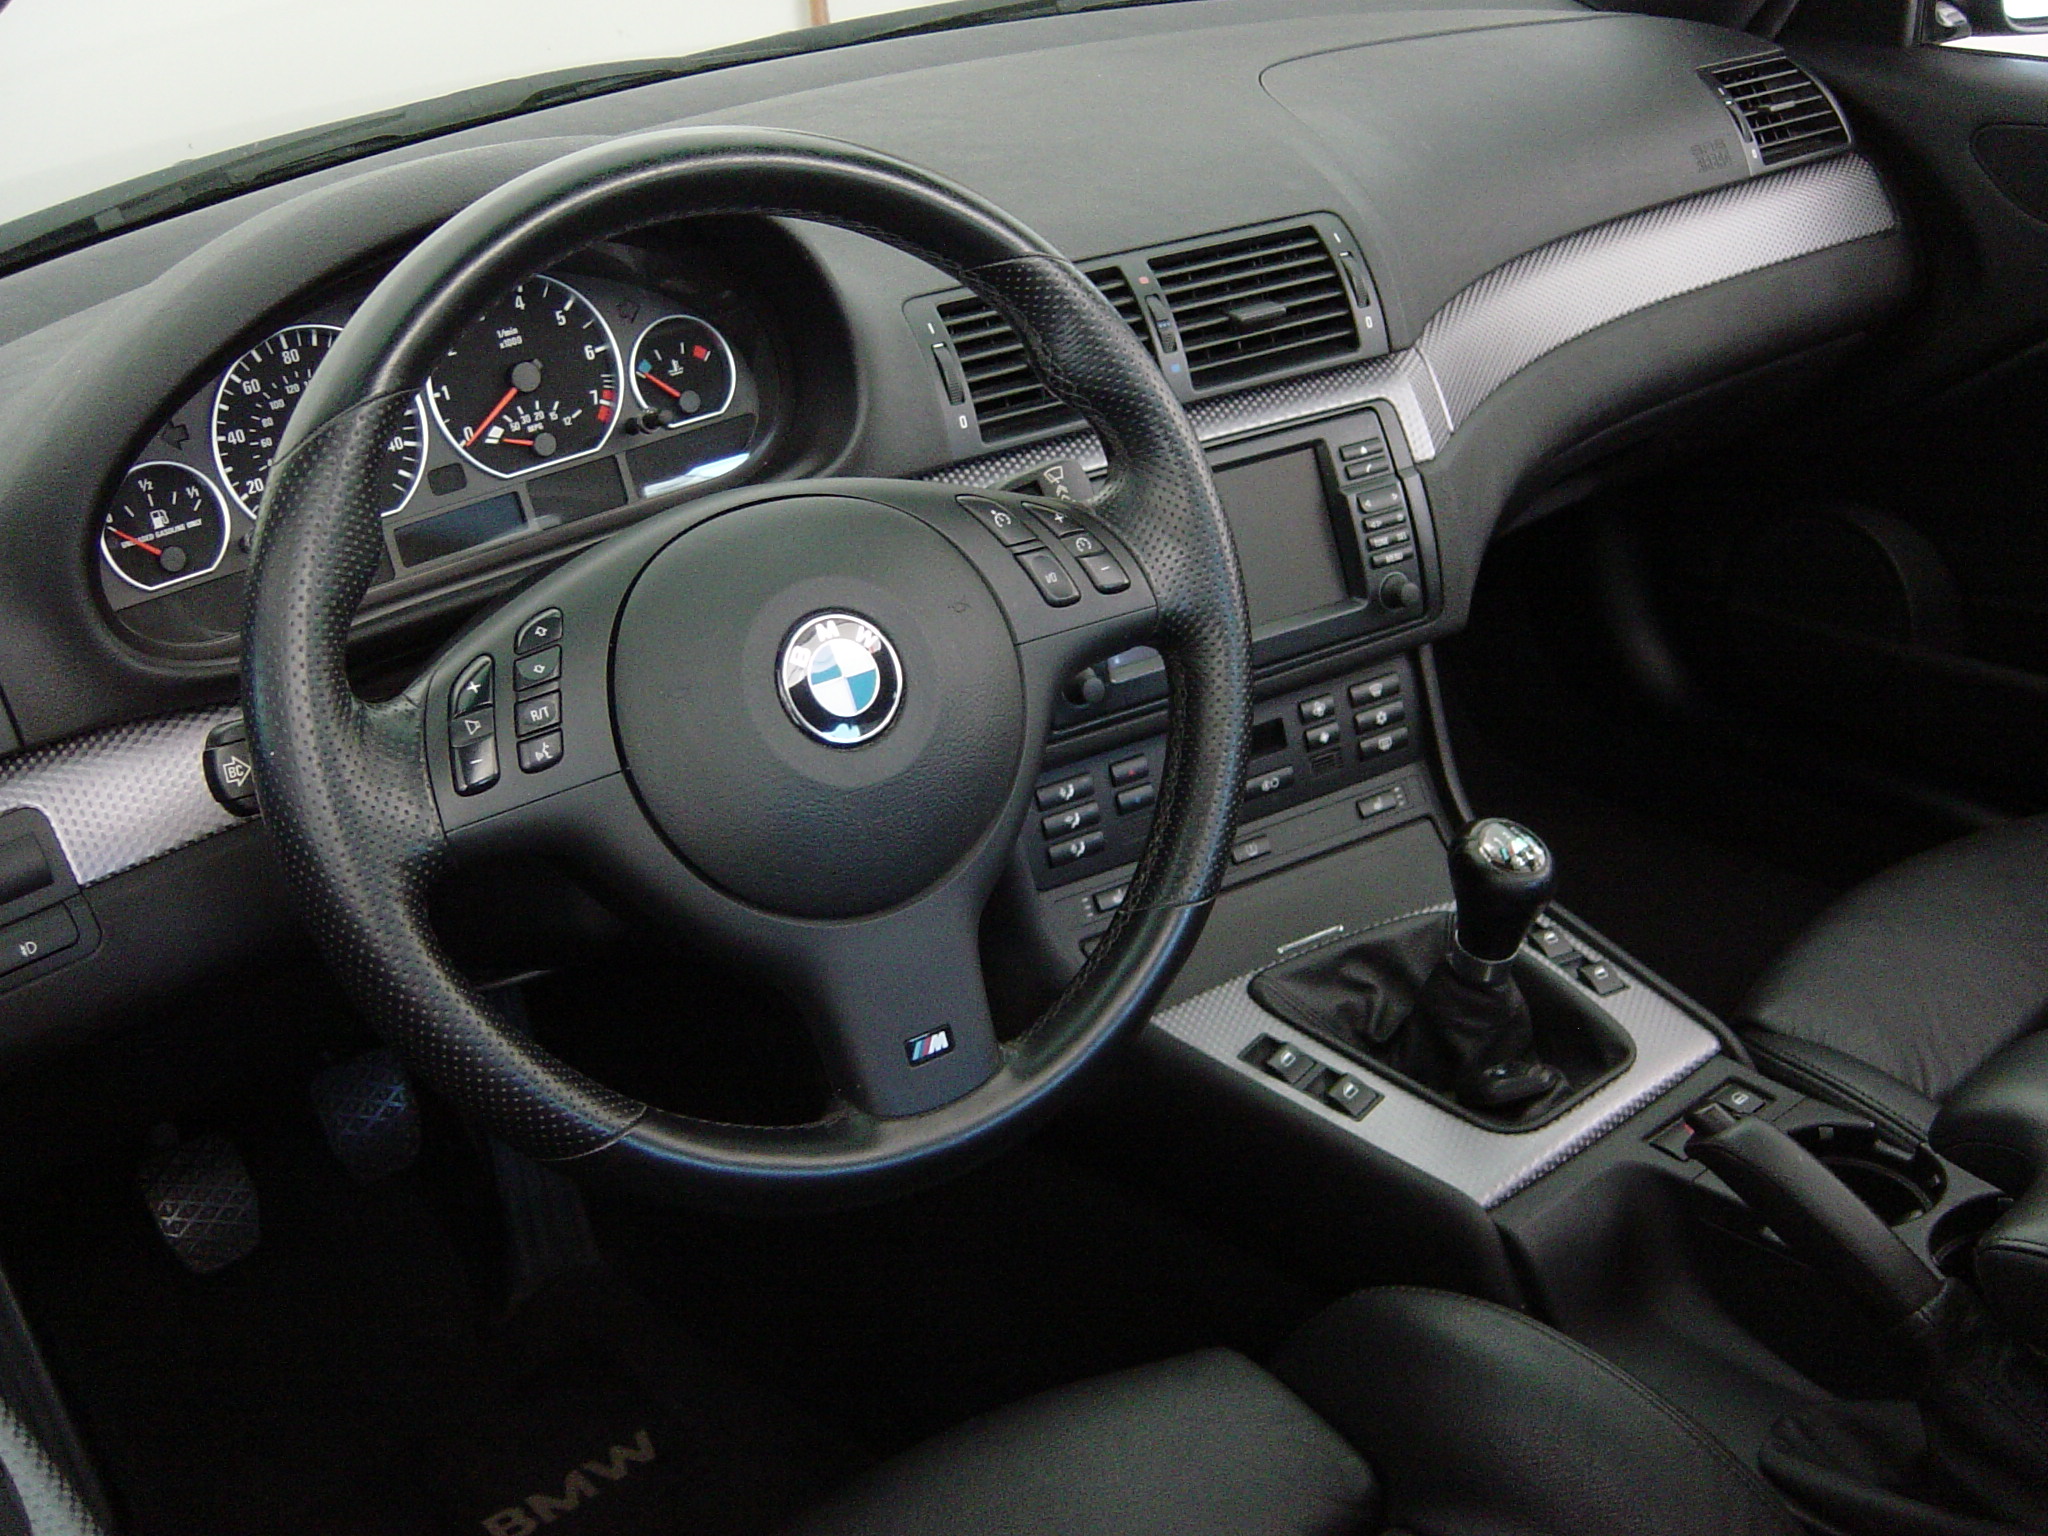 Let's see your E46 interior!